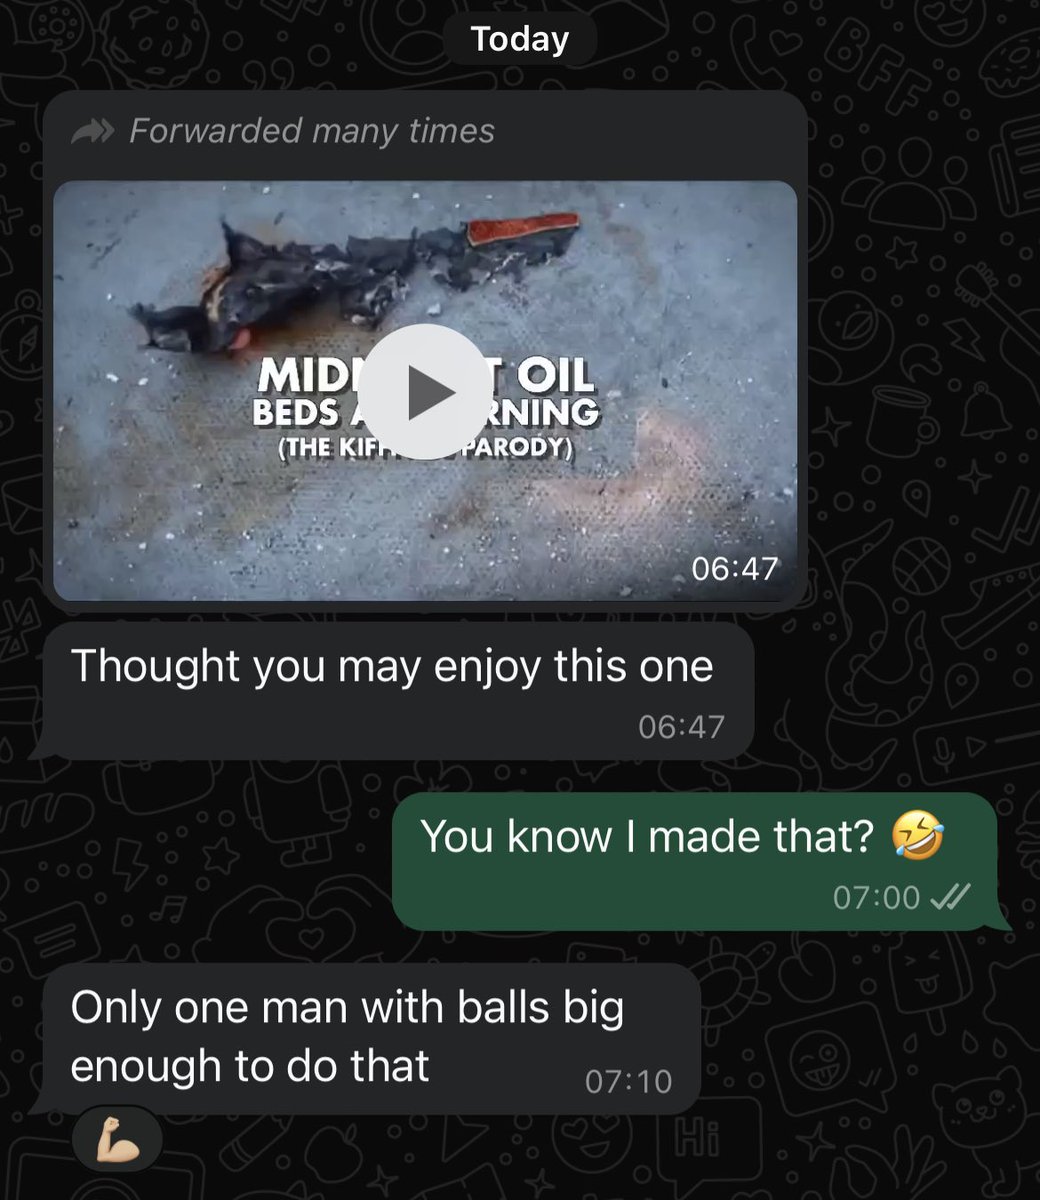 I've made enough viral videos to know that when your own video gets sent to you on Whatsapp by an old school mate with 'Forwarded many times' in the header, then the video has well & truly gone viral.